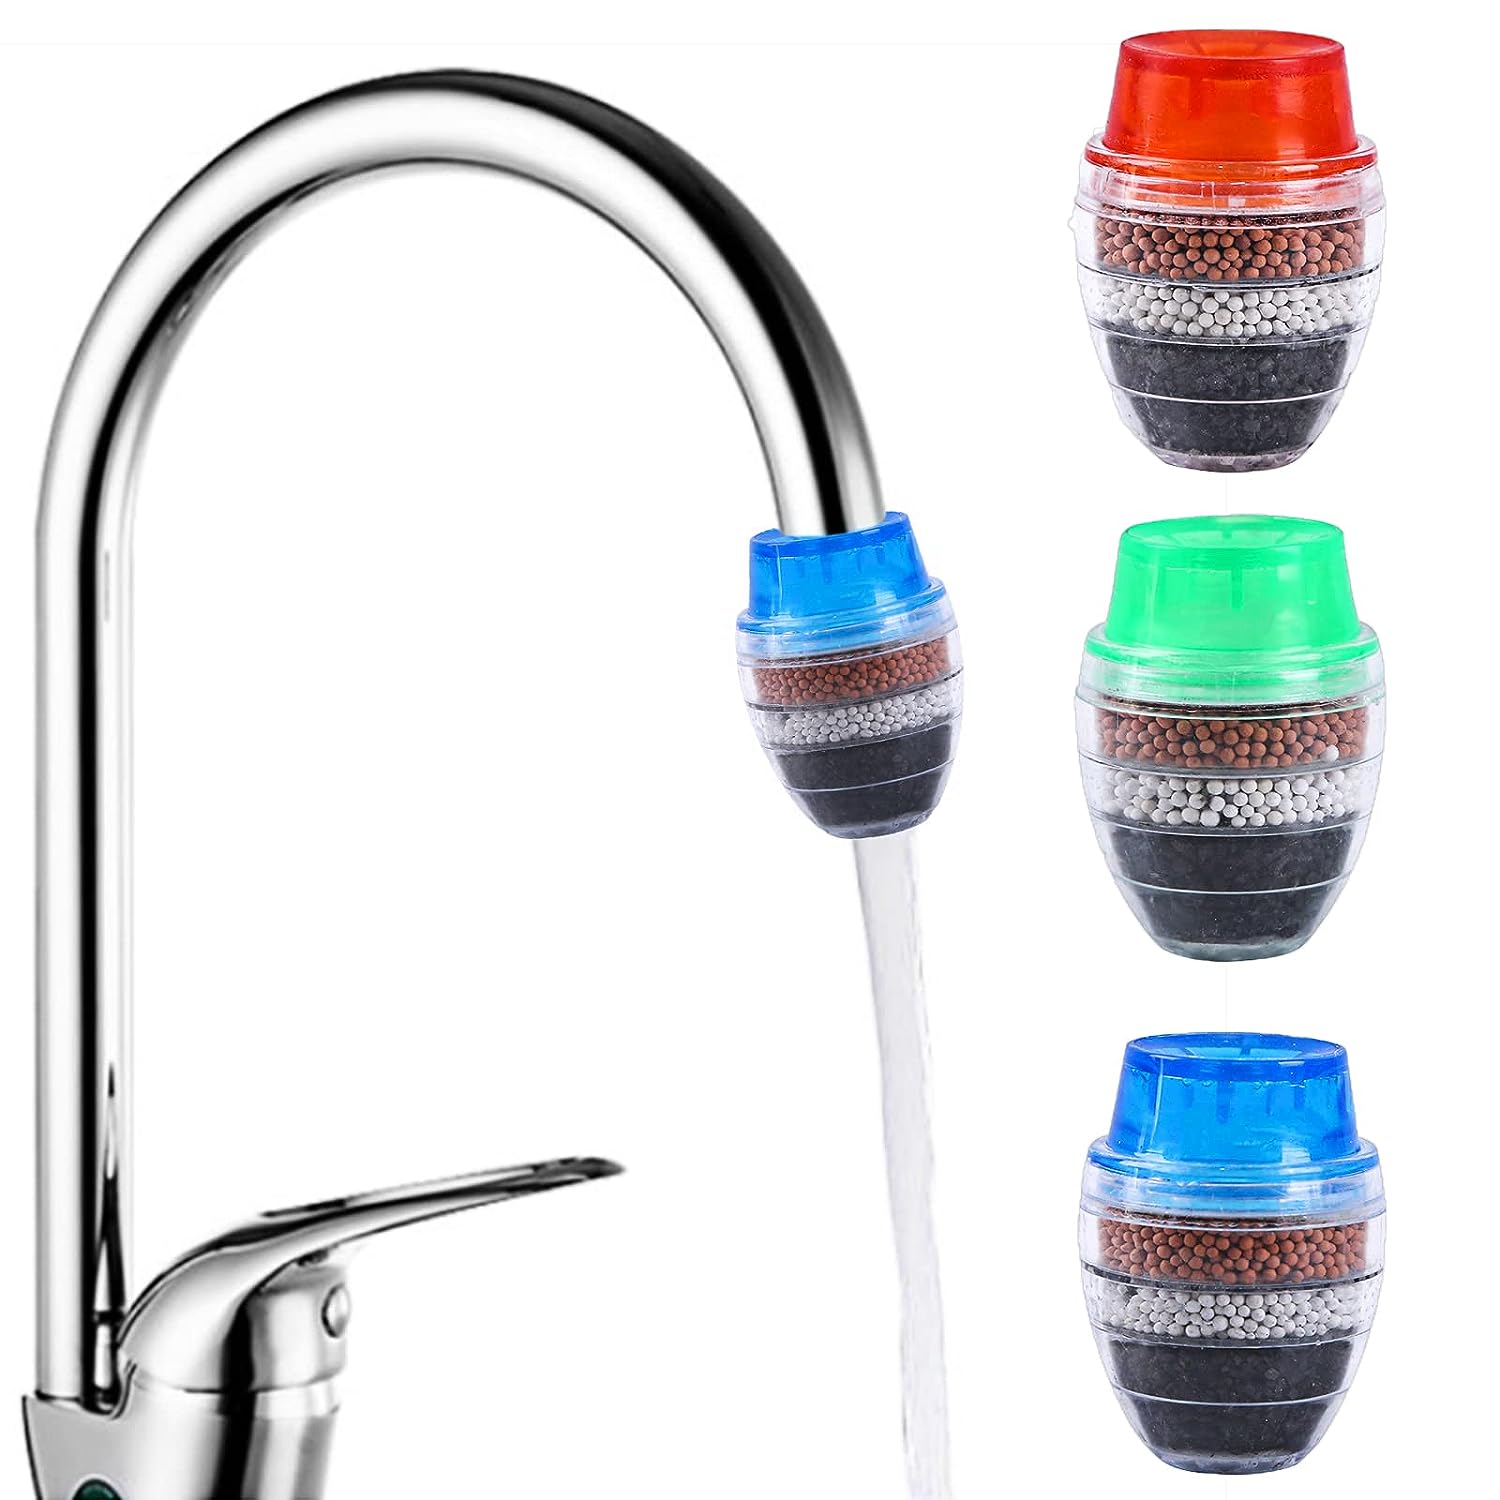 3 Pack Faucet Mount Filters, Faucet Water Filter Tap [...]